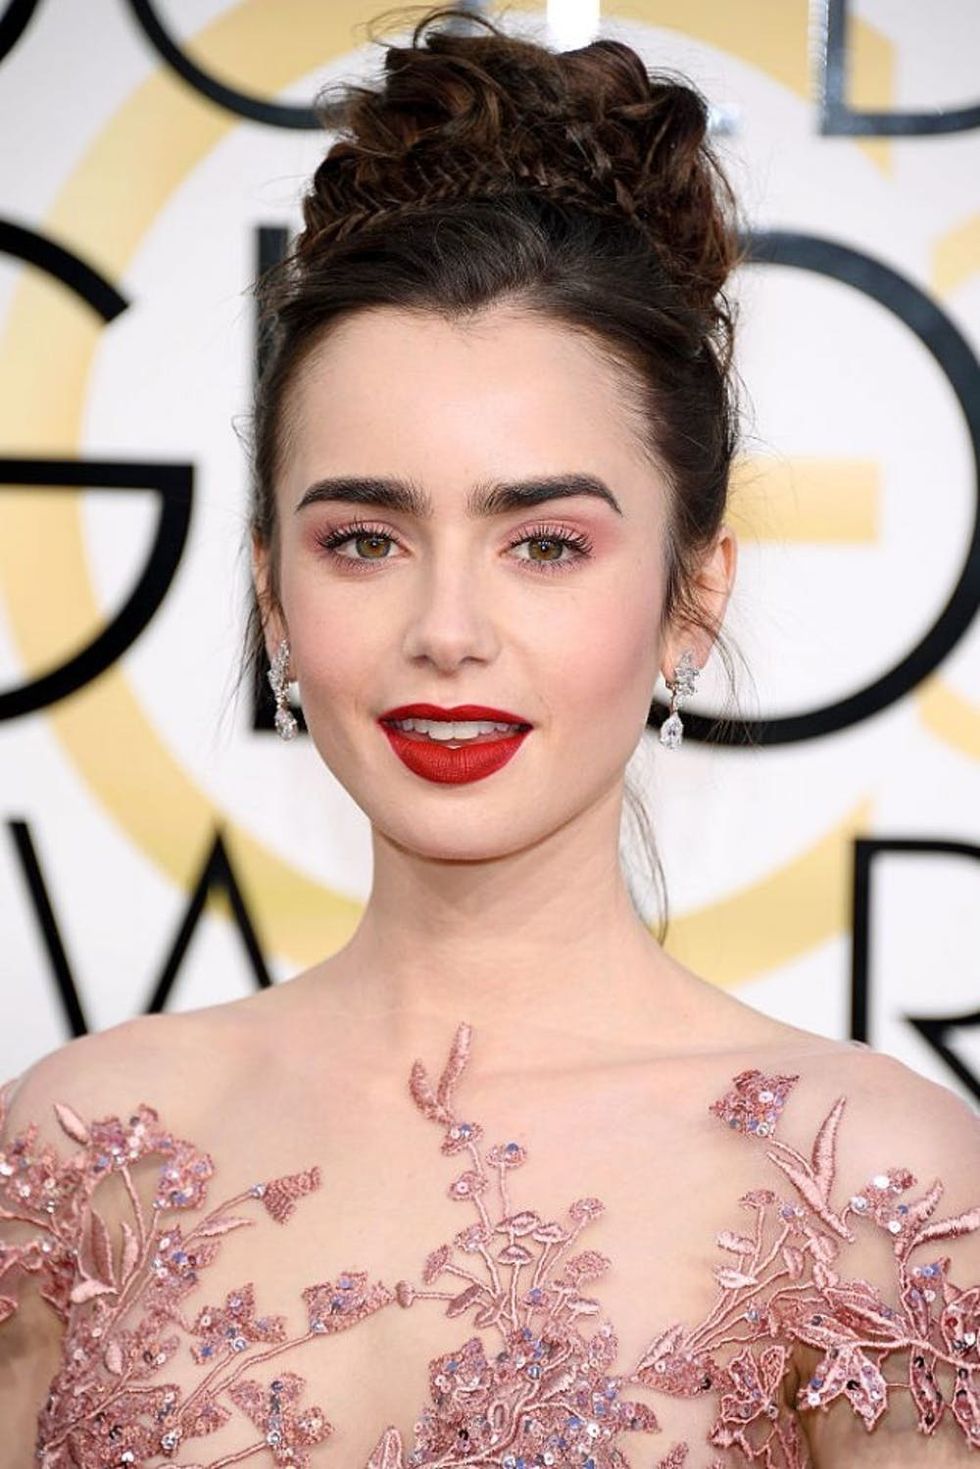 BEVERLY HILLS, CA - JANUARY 08: Lily Collins attends the 74th Annual Golden Globe Awards at The Beverly Hilton Hotel on January 8, 2017 in Beverly Hills, California. (Photo by Venturelli/WireImage)